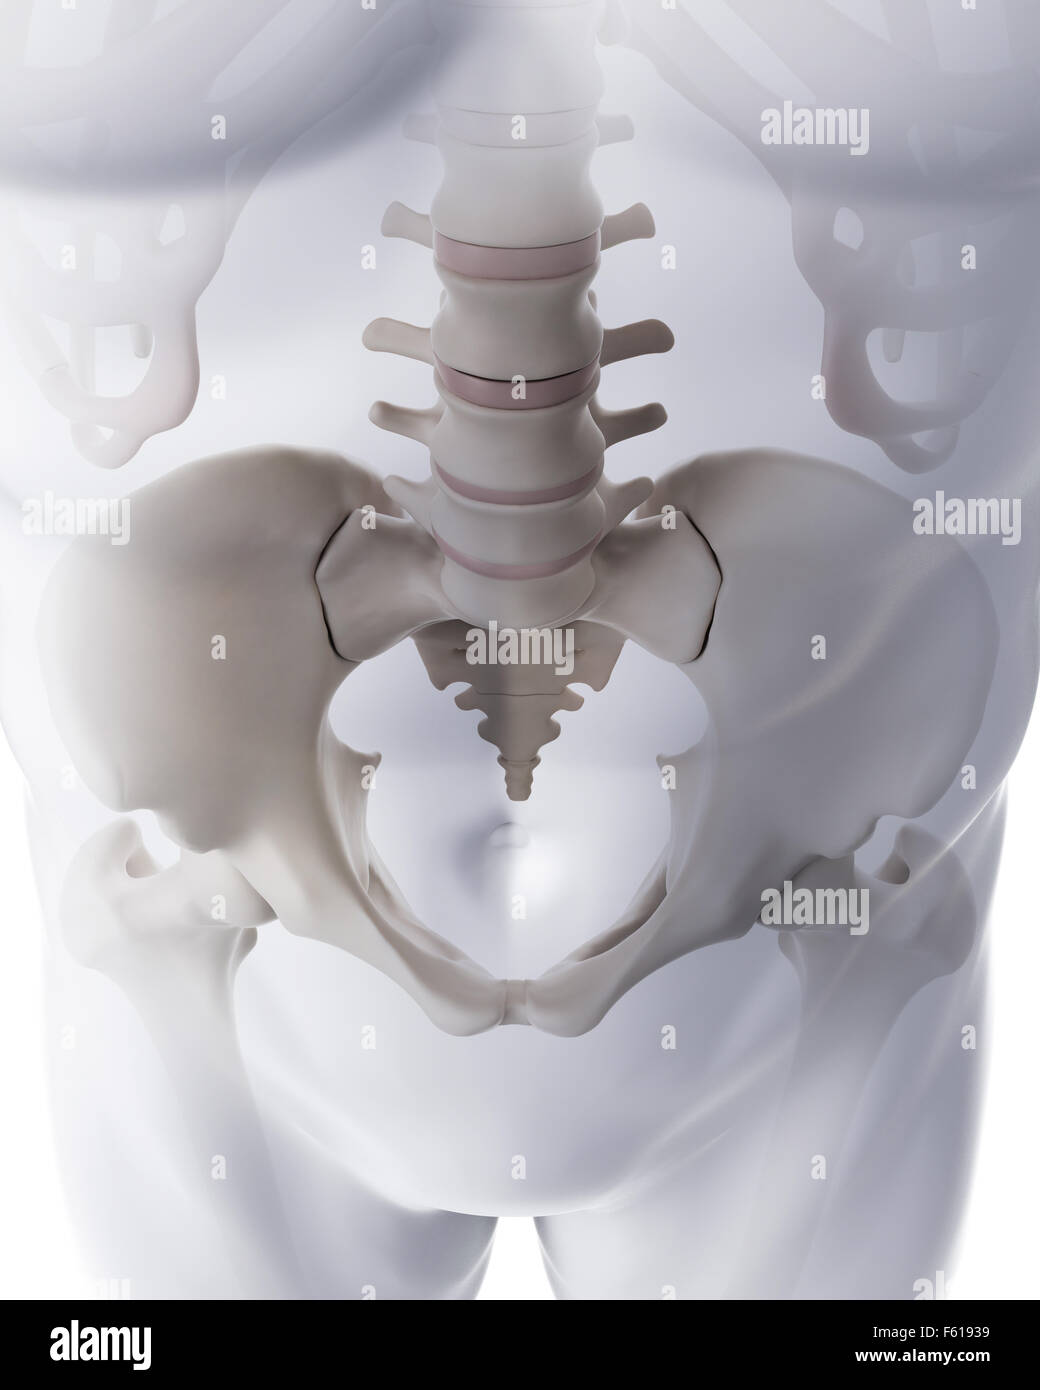 medically accurate illustration of the lumbar spine Stock Photo